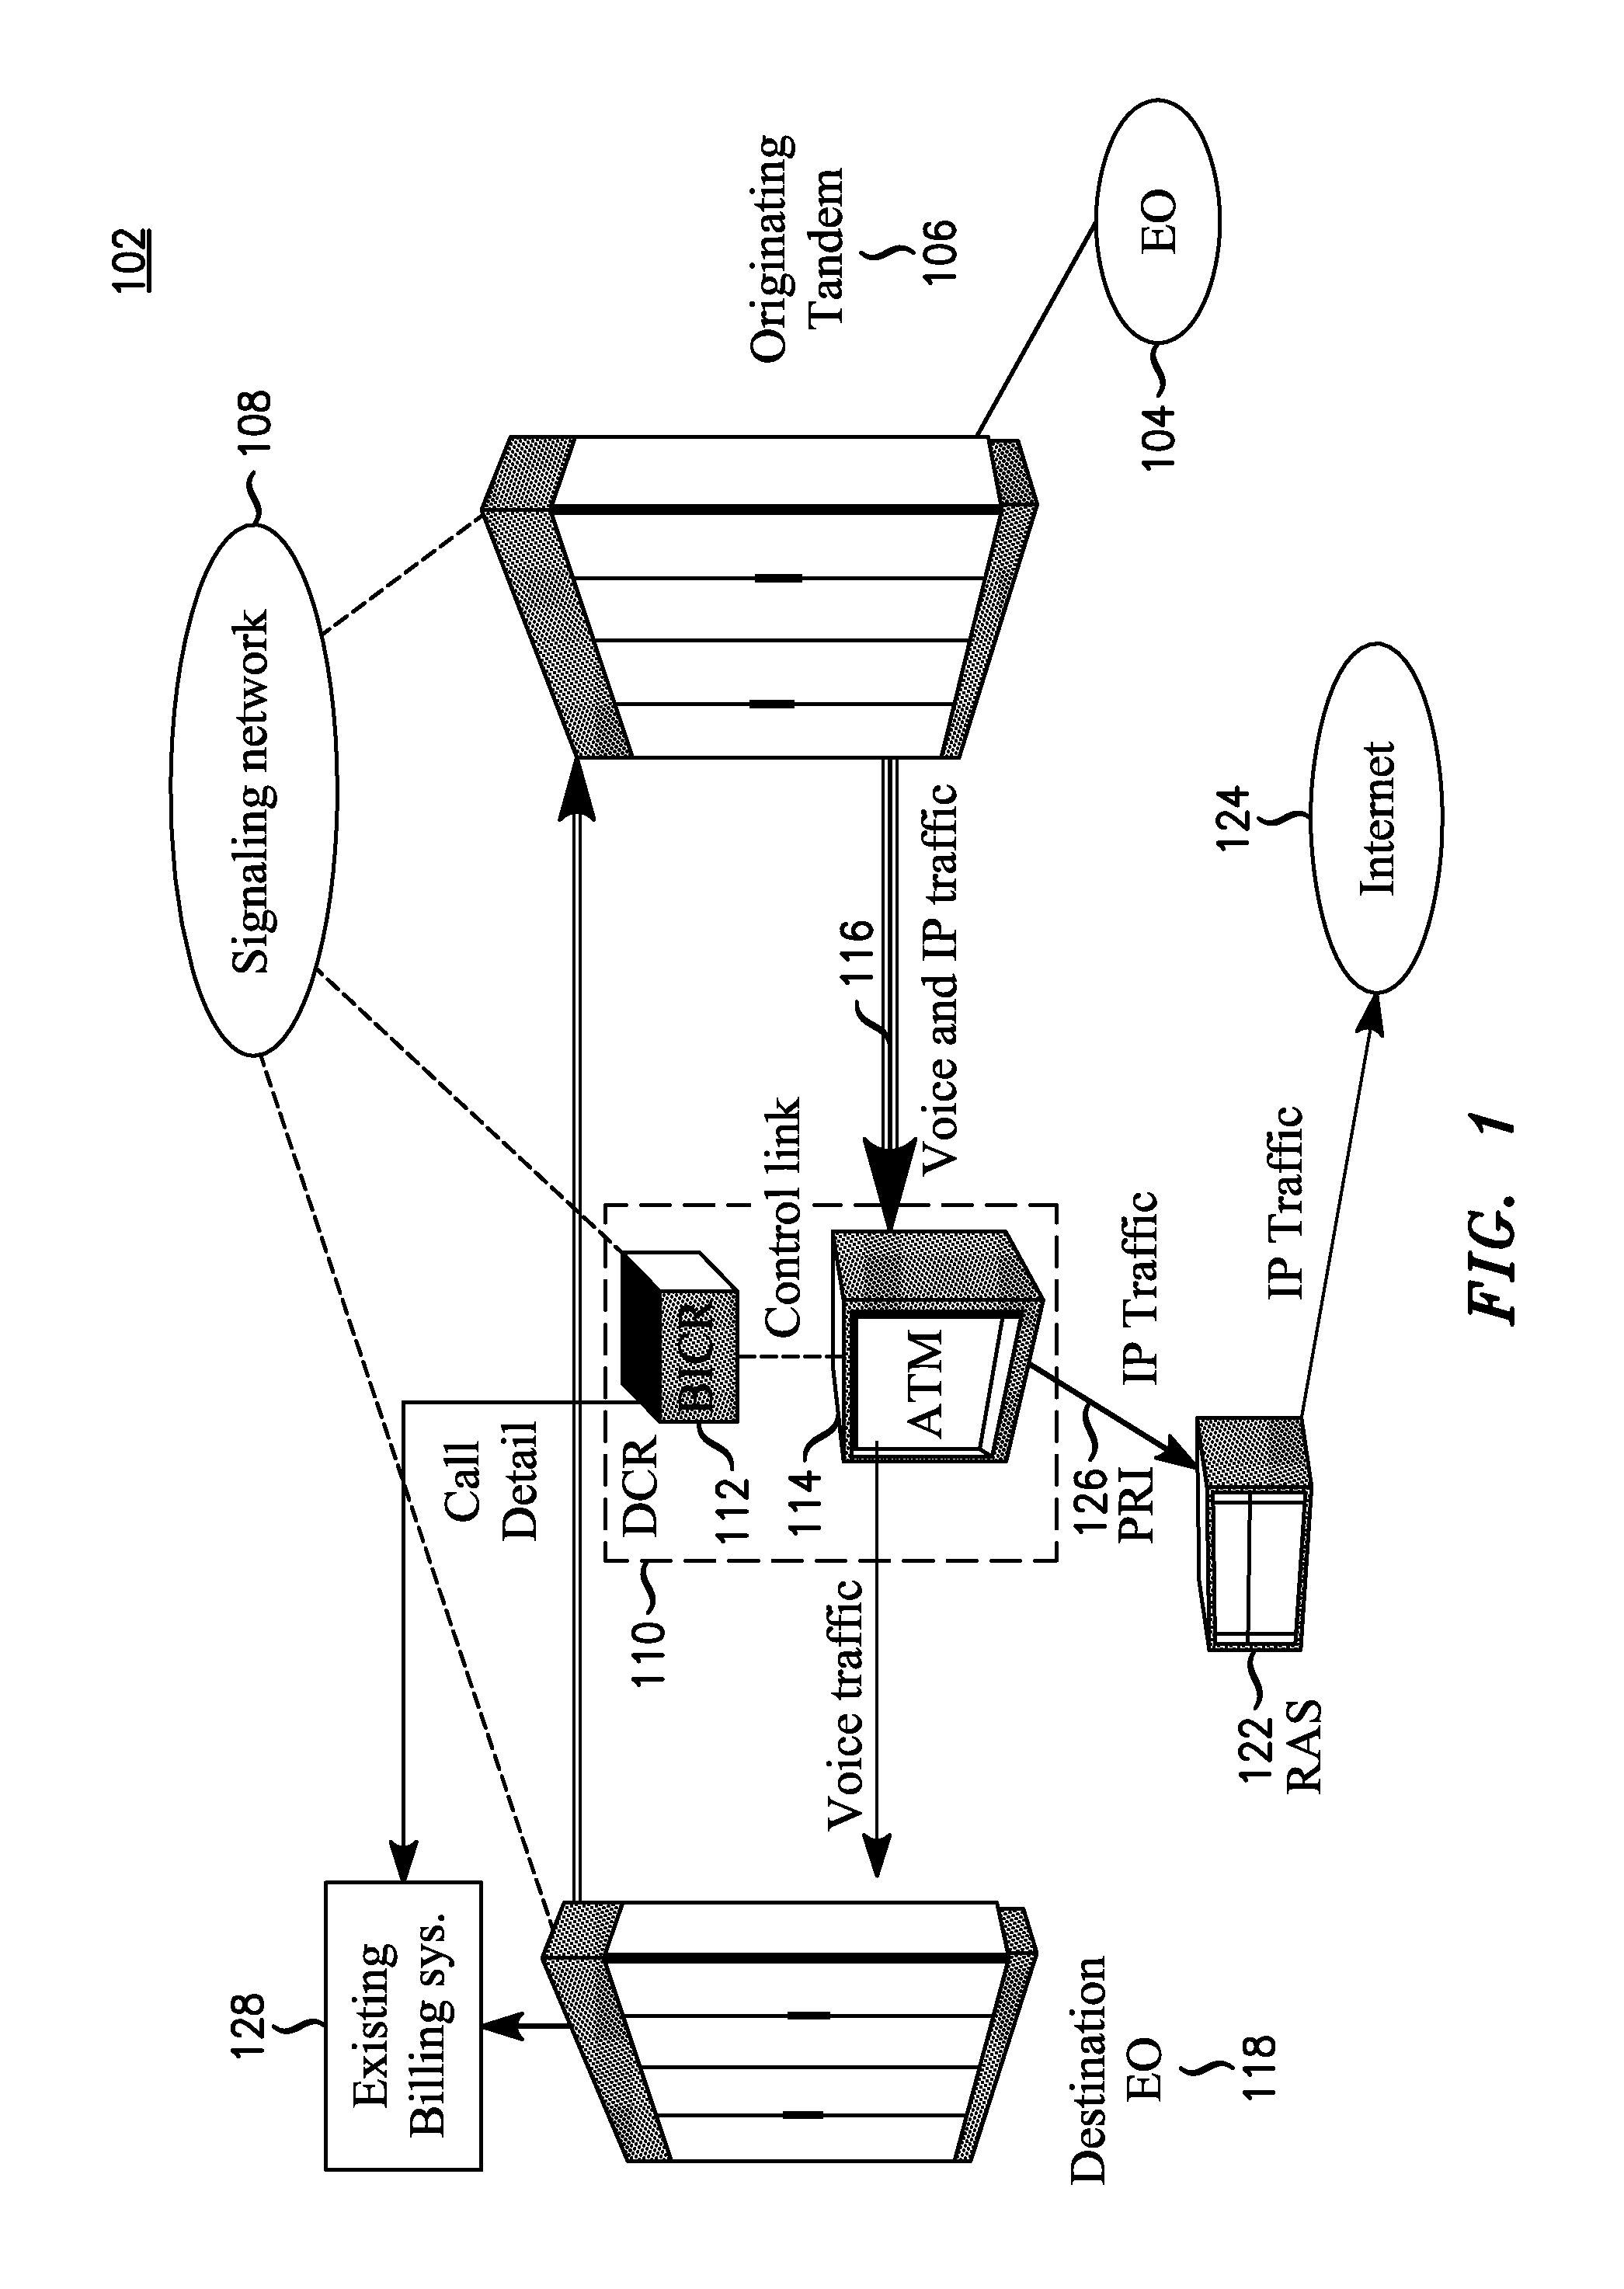 Destination call routing apparatus and method